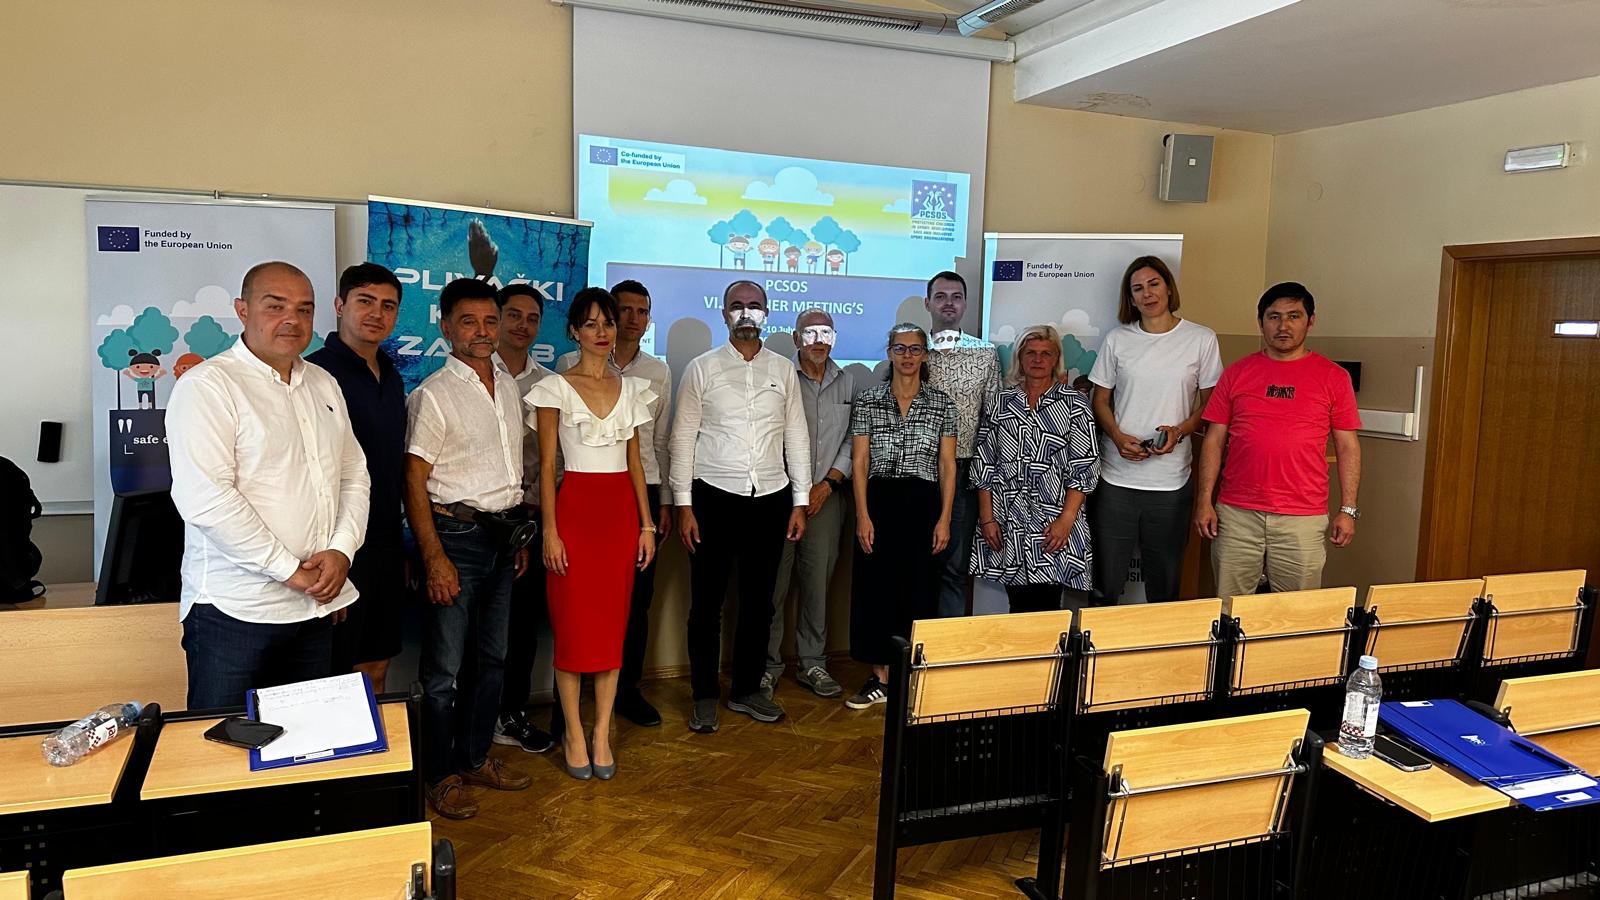 The Second Meeting of the European Union Project, which we are the Coordinators, was held in the stakeholder country Croatia